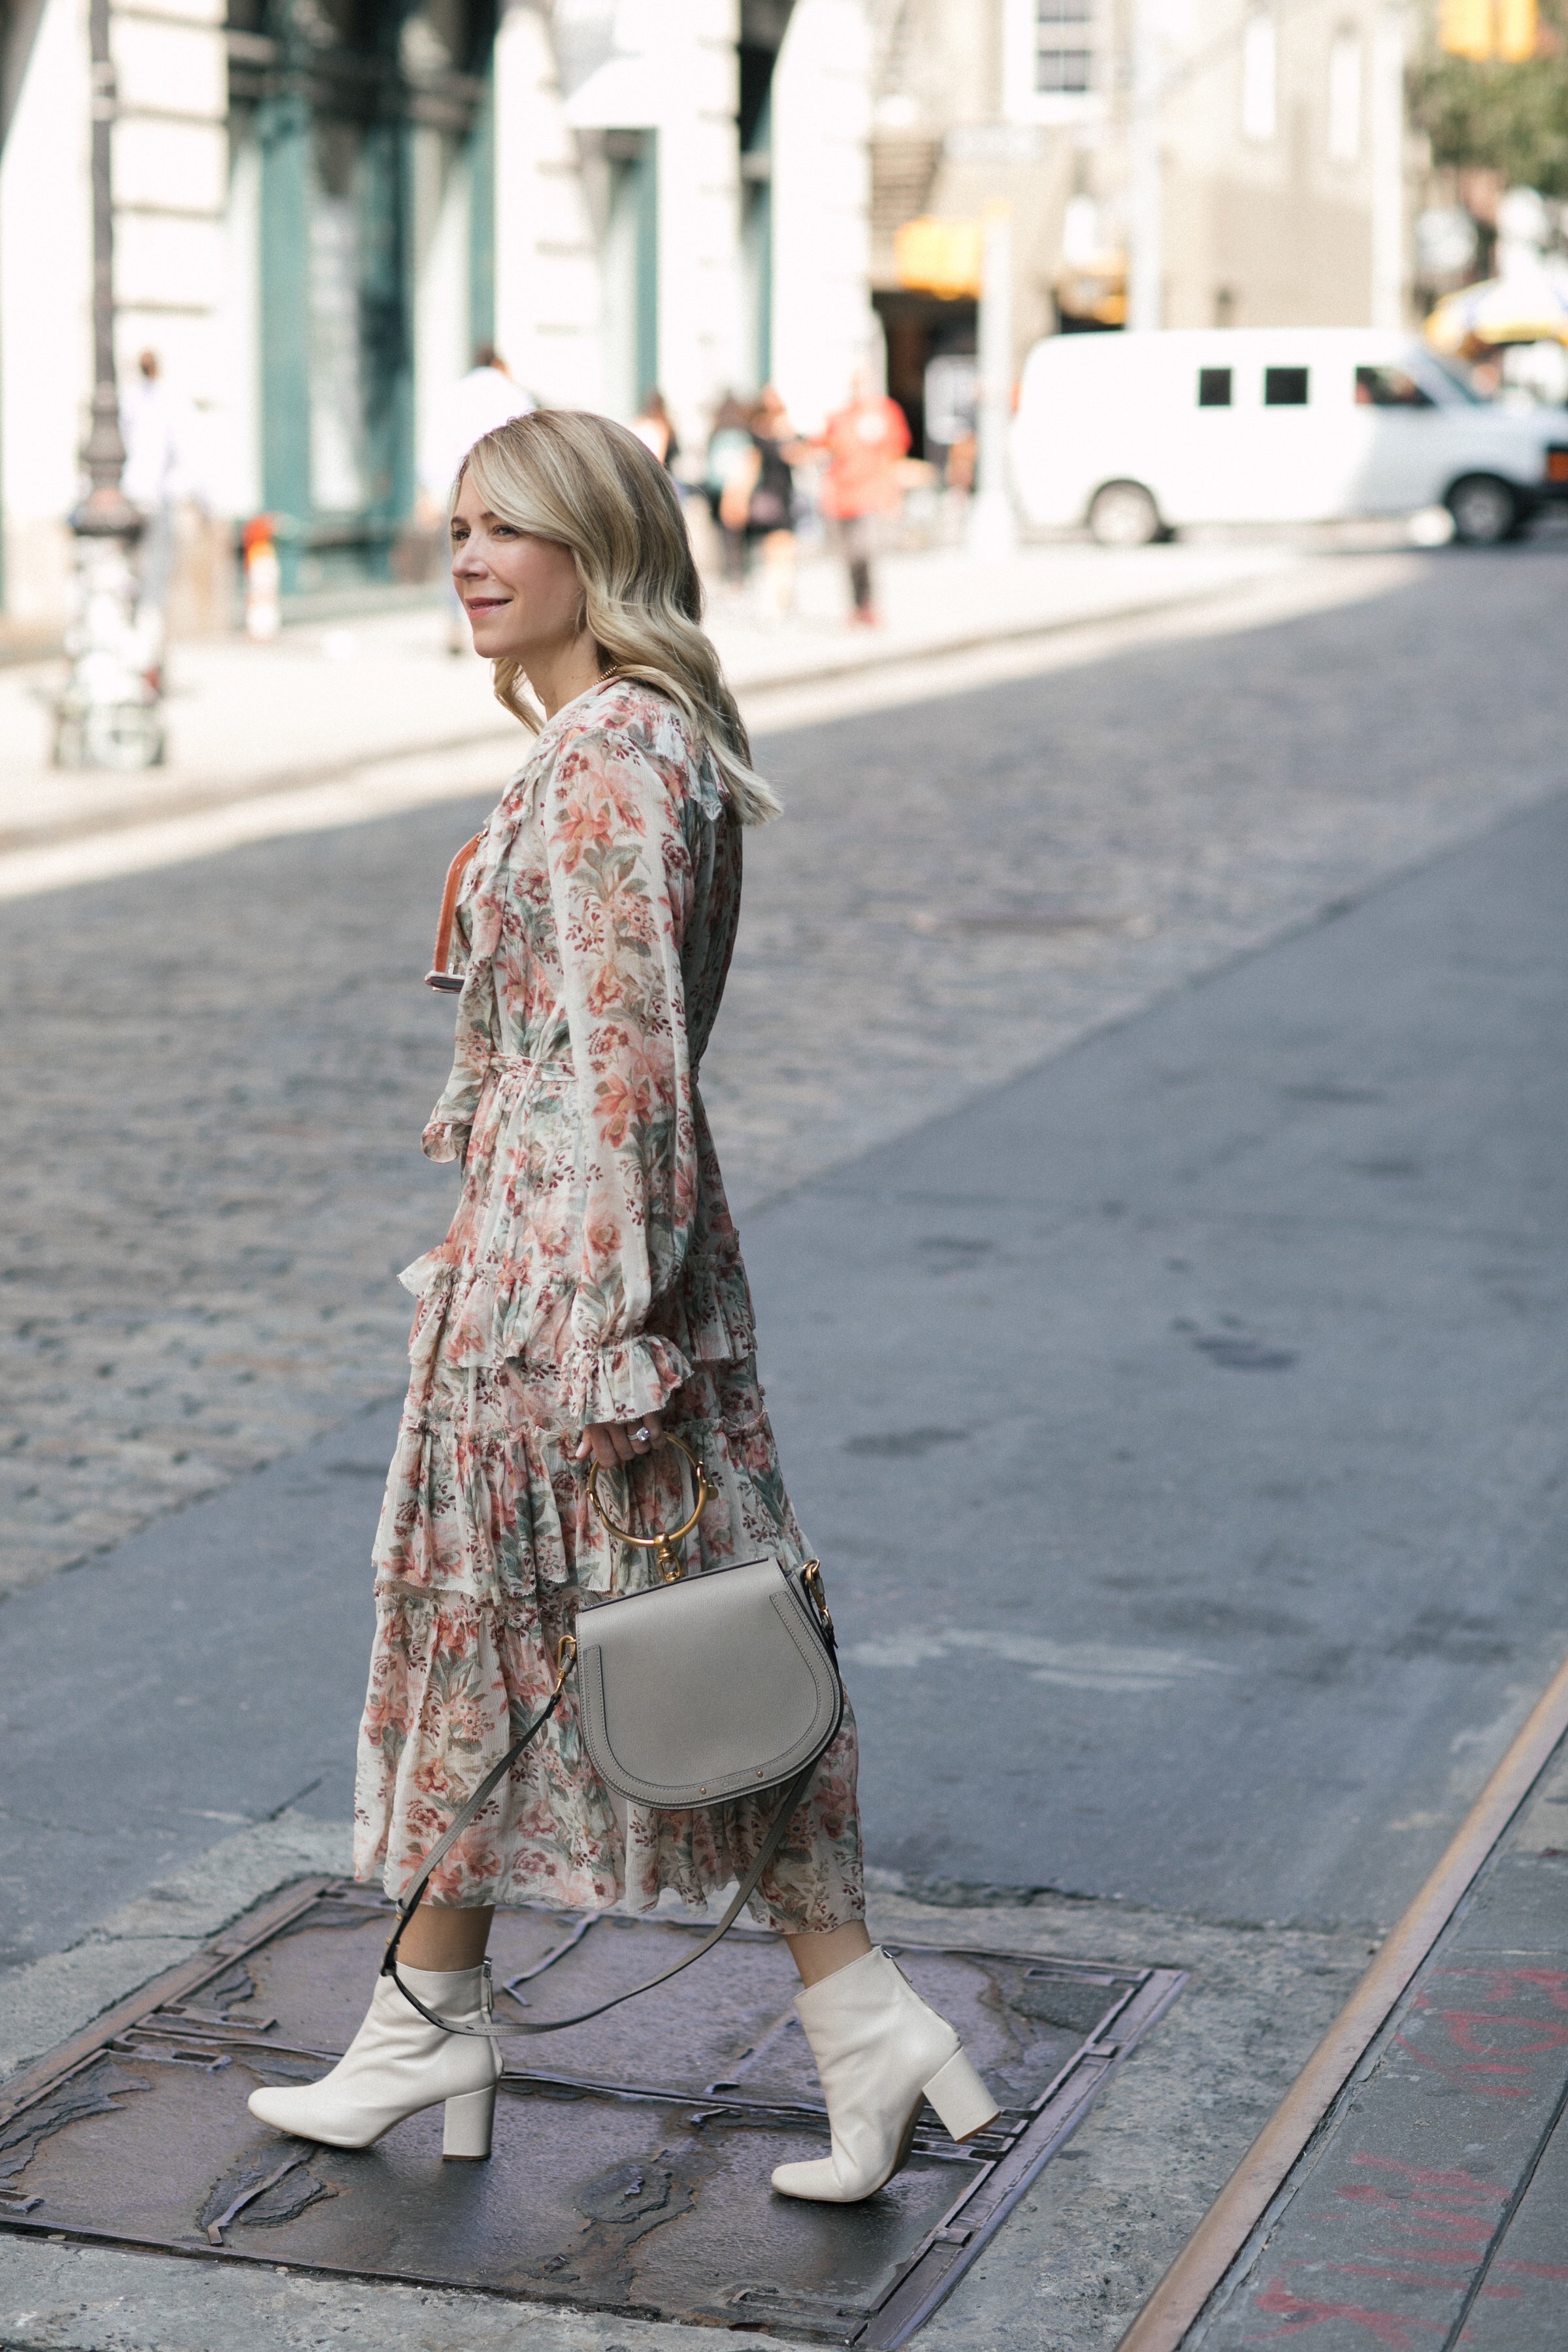 Zimmermann, floaty floral dresses, and friendship! | About The Outfits